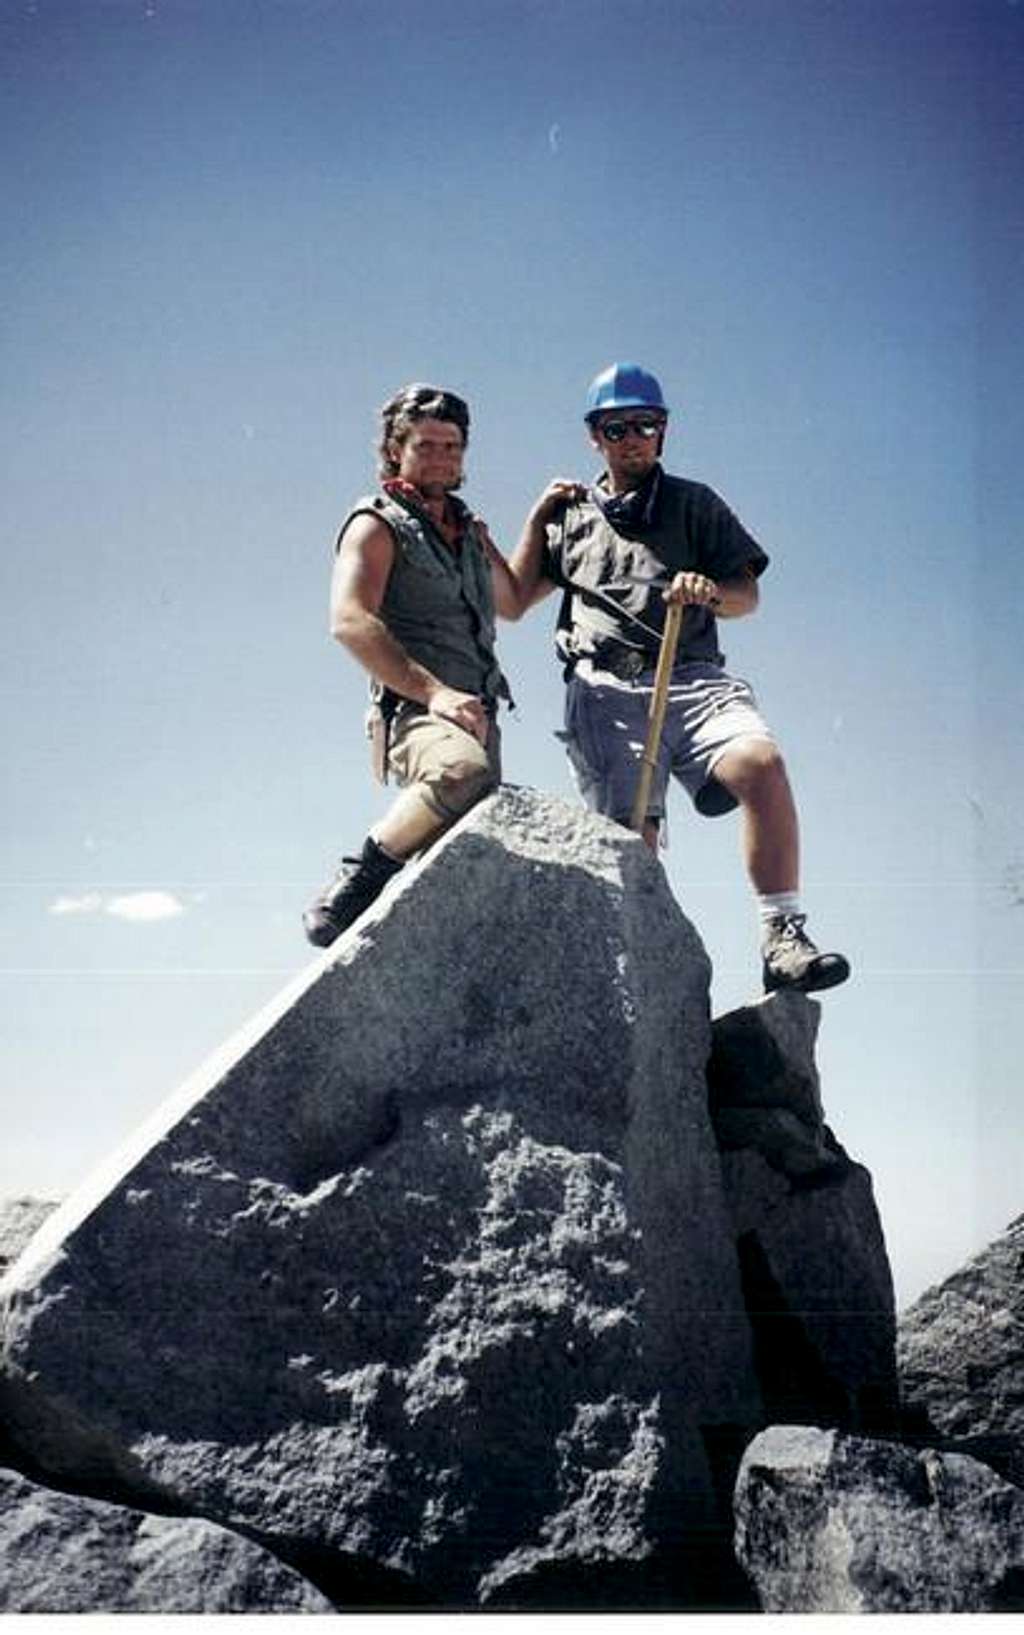 Me and my Amigo on the summit...